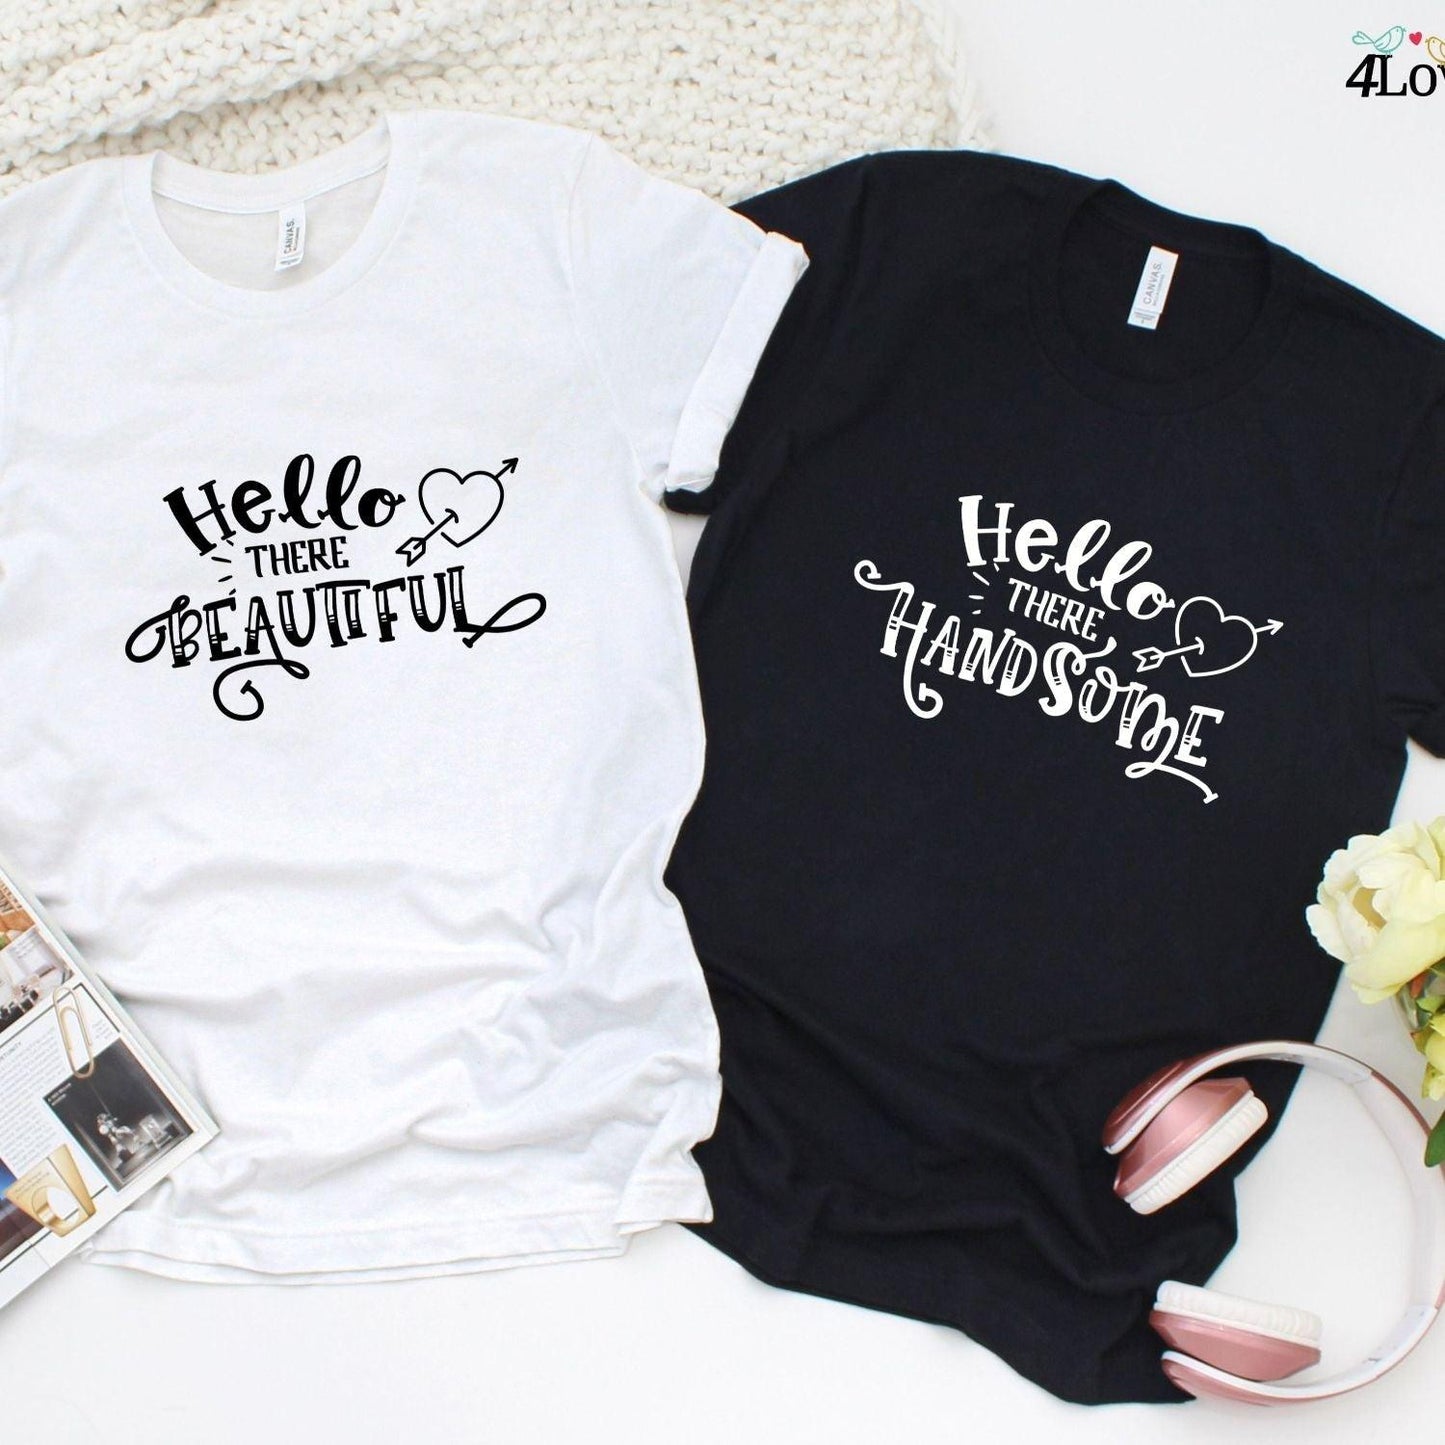 Matching Outfits for Couples: "Hello Beautiful/Handsome" - Perfect Valentine's Day Gift! - 4Lovebirds